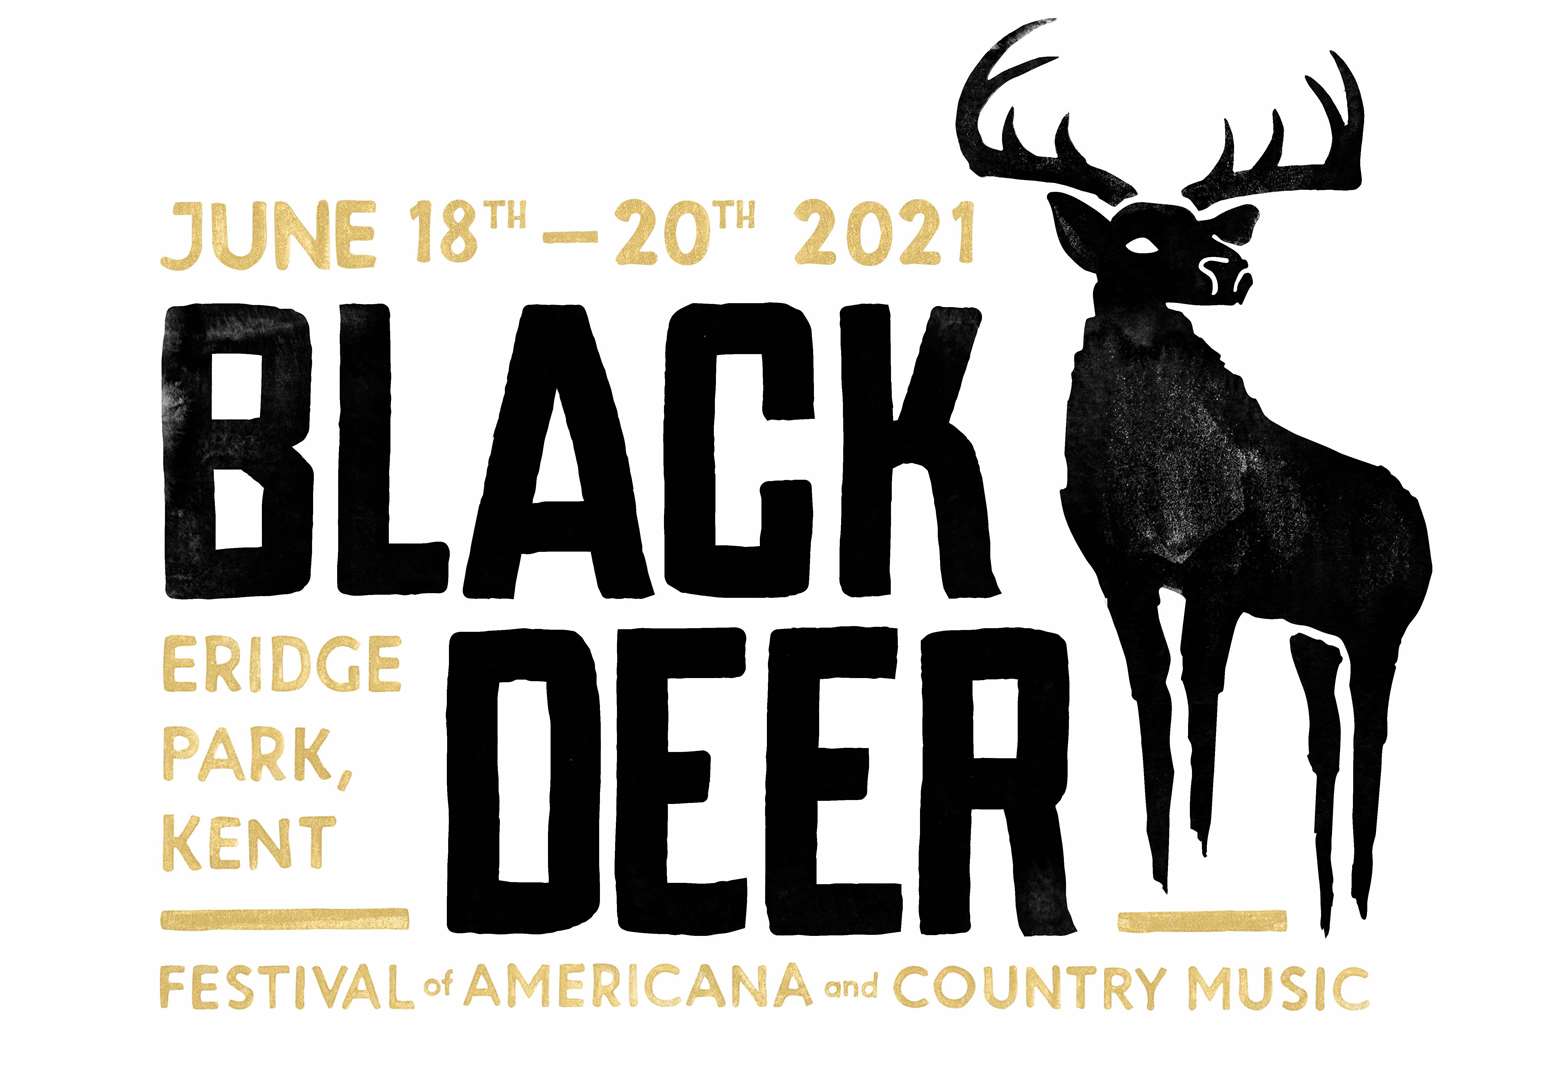 Black Deer 2021is going ahead as planned, according to the organisers